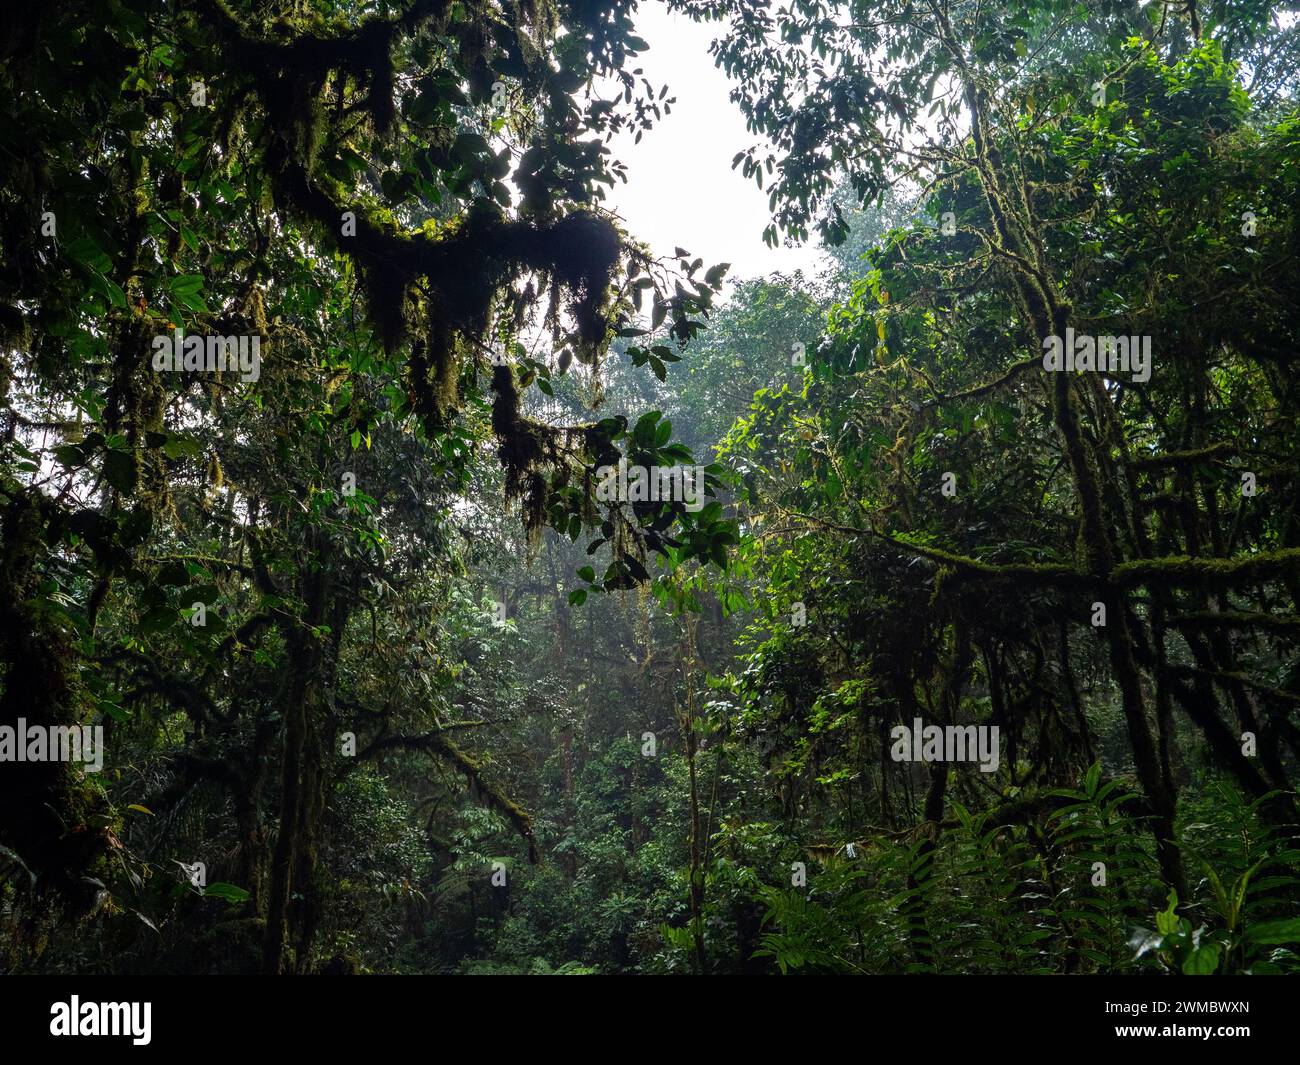 Rainforest of the Bwindi Impenetrable National Park, Uganda. The park was listed as a UNESCO World Heritage Site in 1994. The tropical rainforest of B Stock Photo